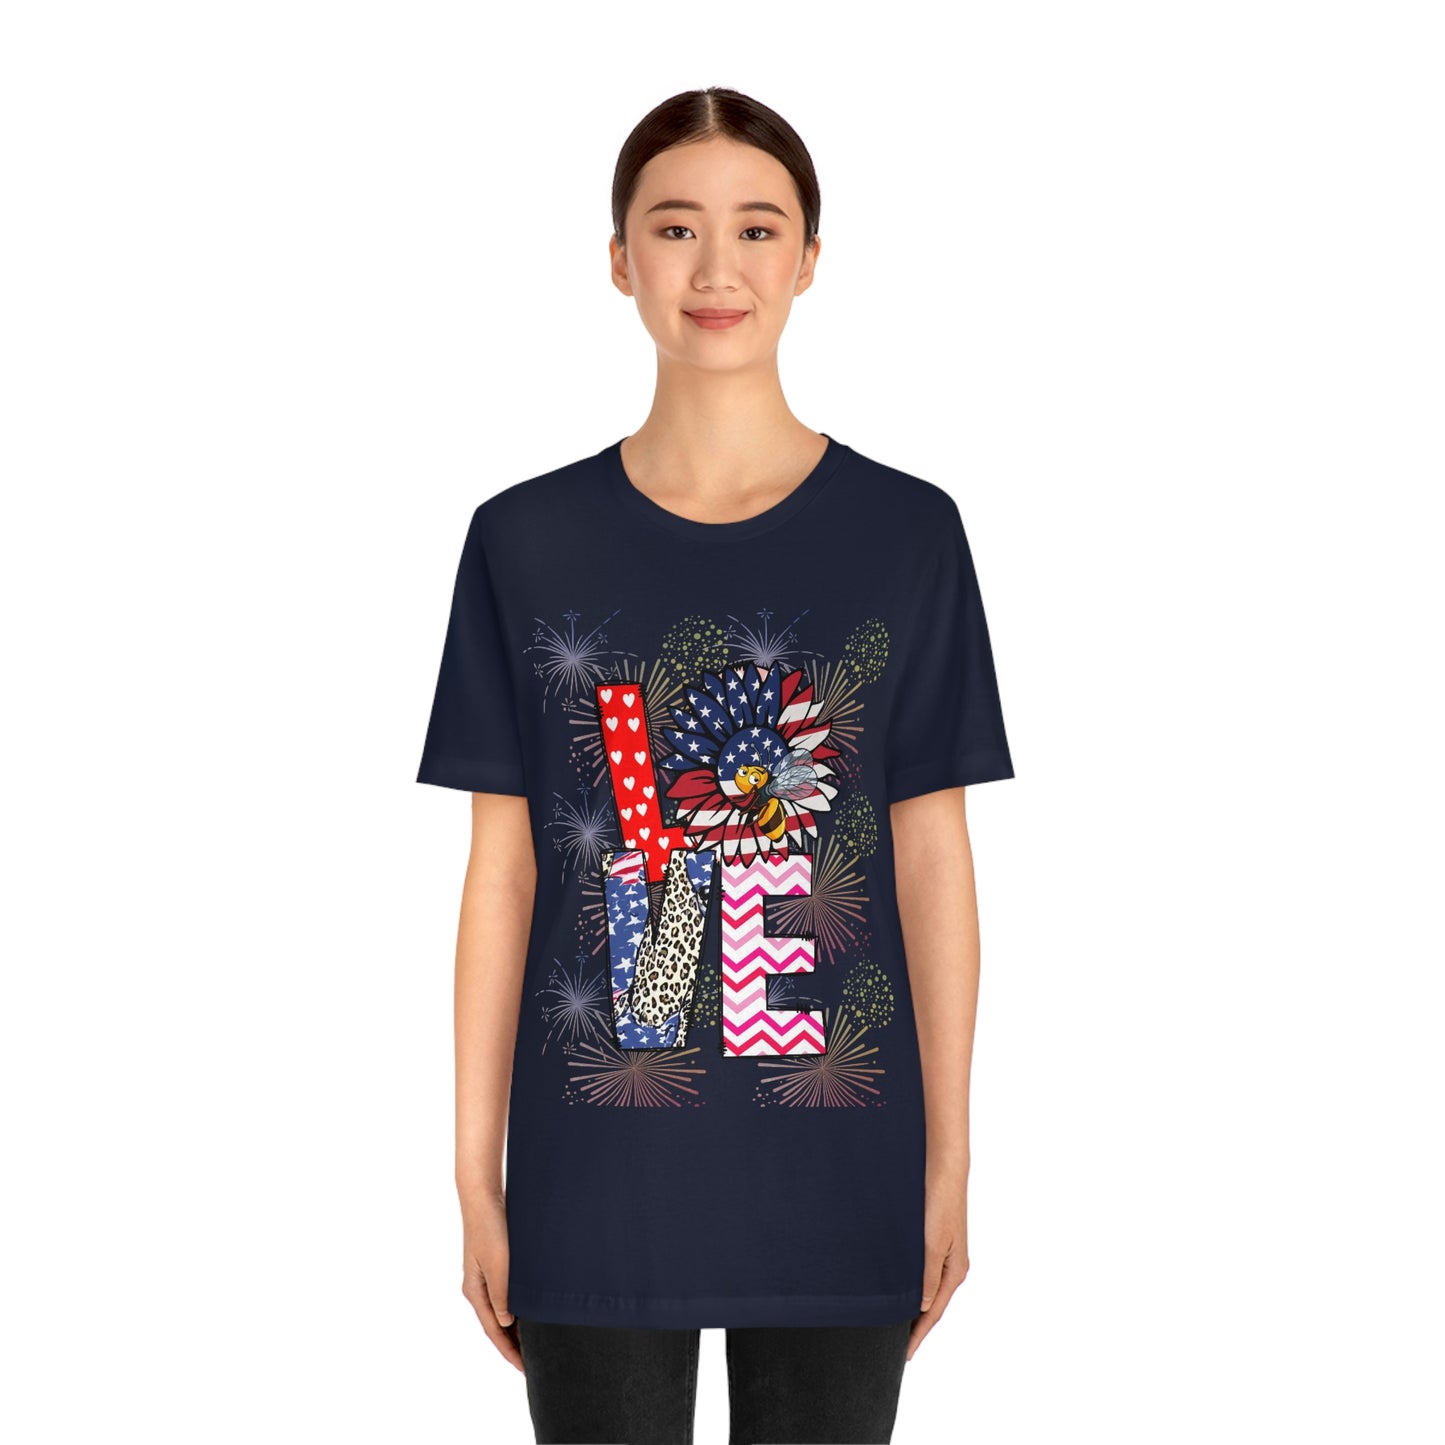 4th of July, America's Day, USA, Short Sleeve Tee